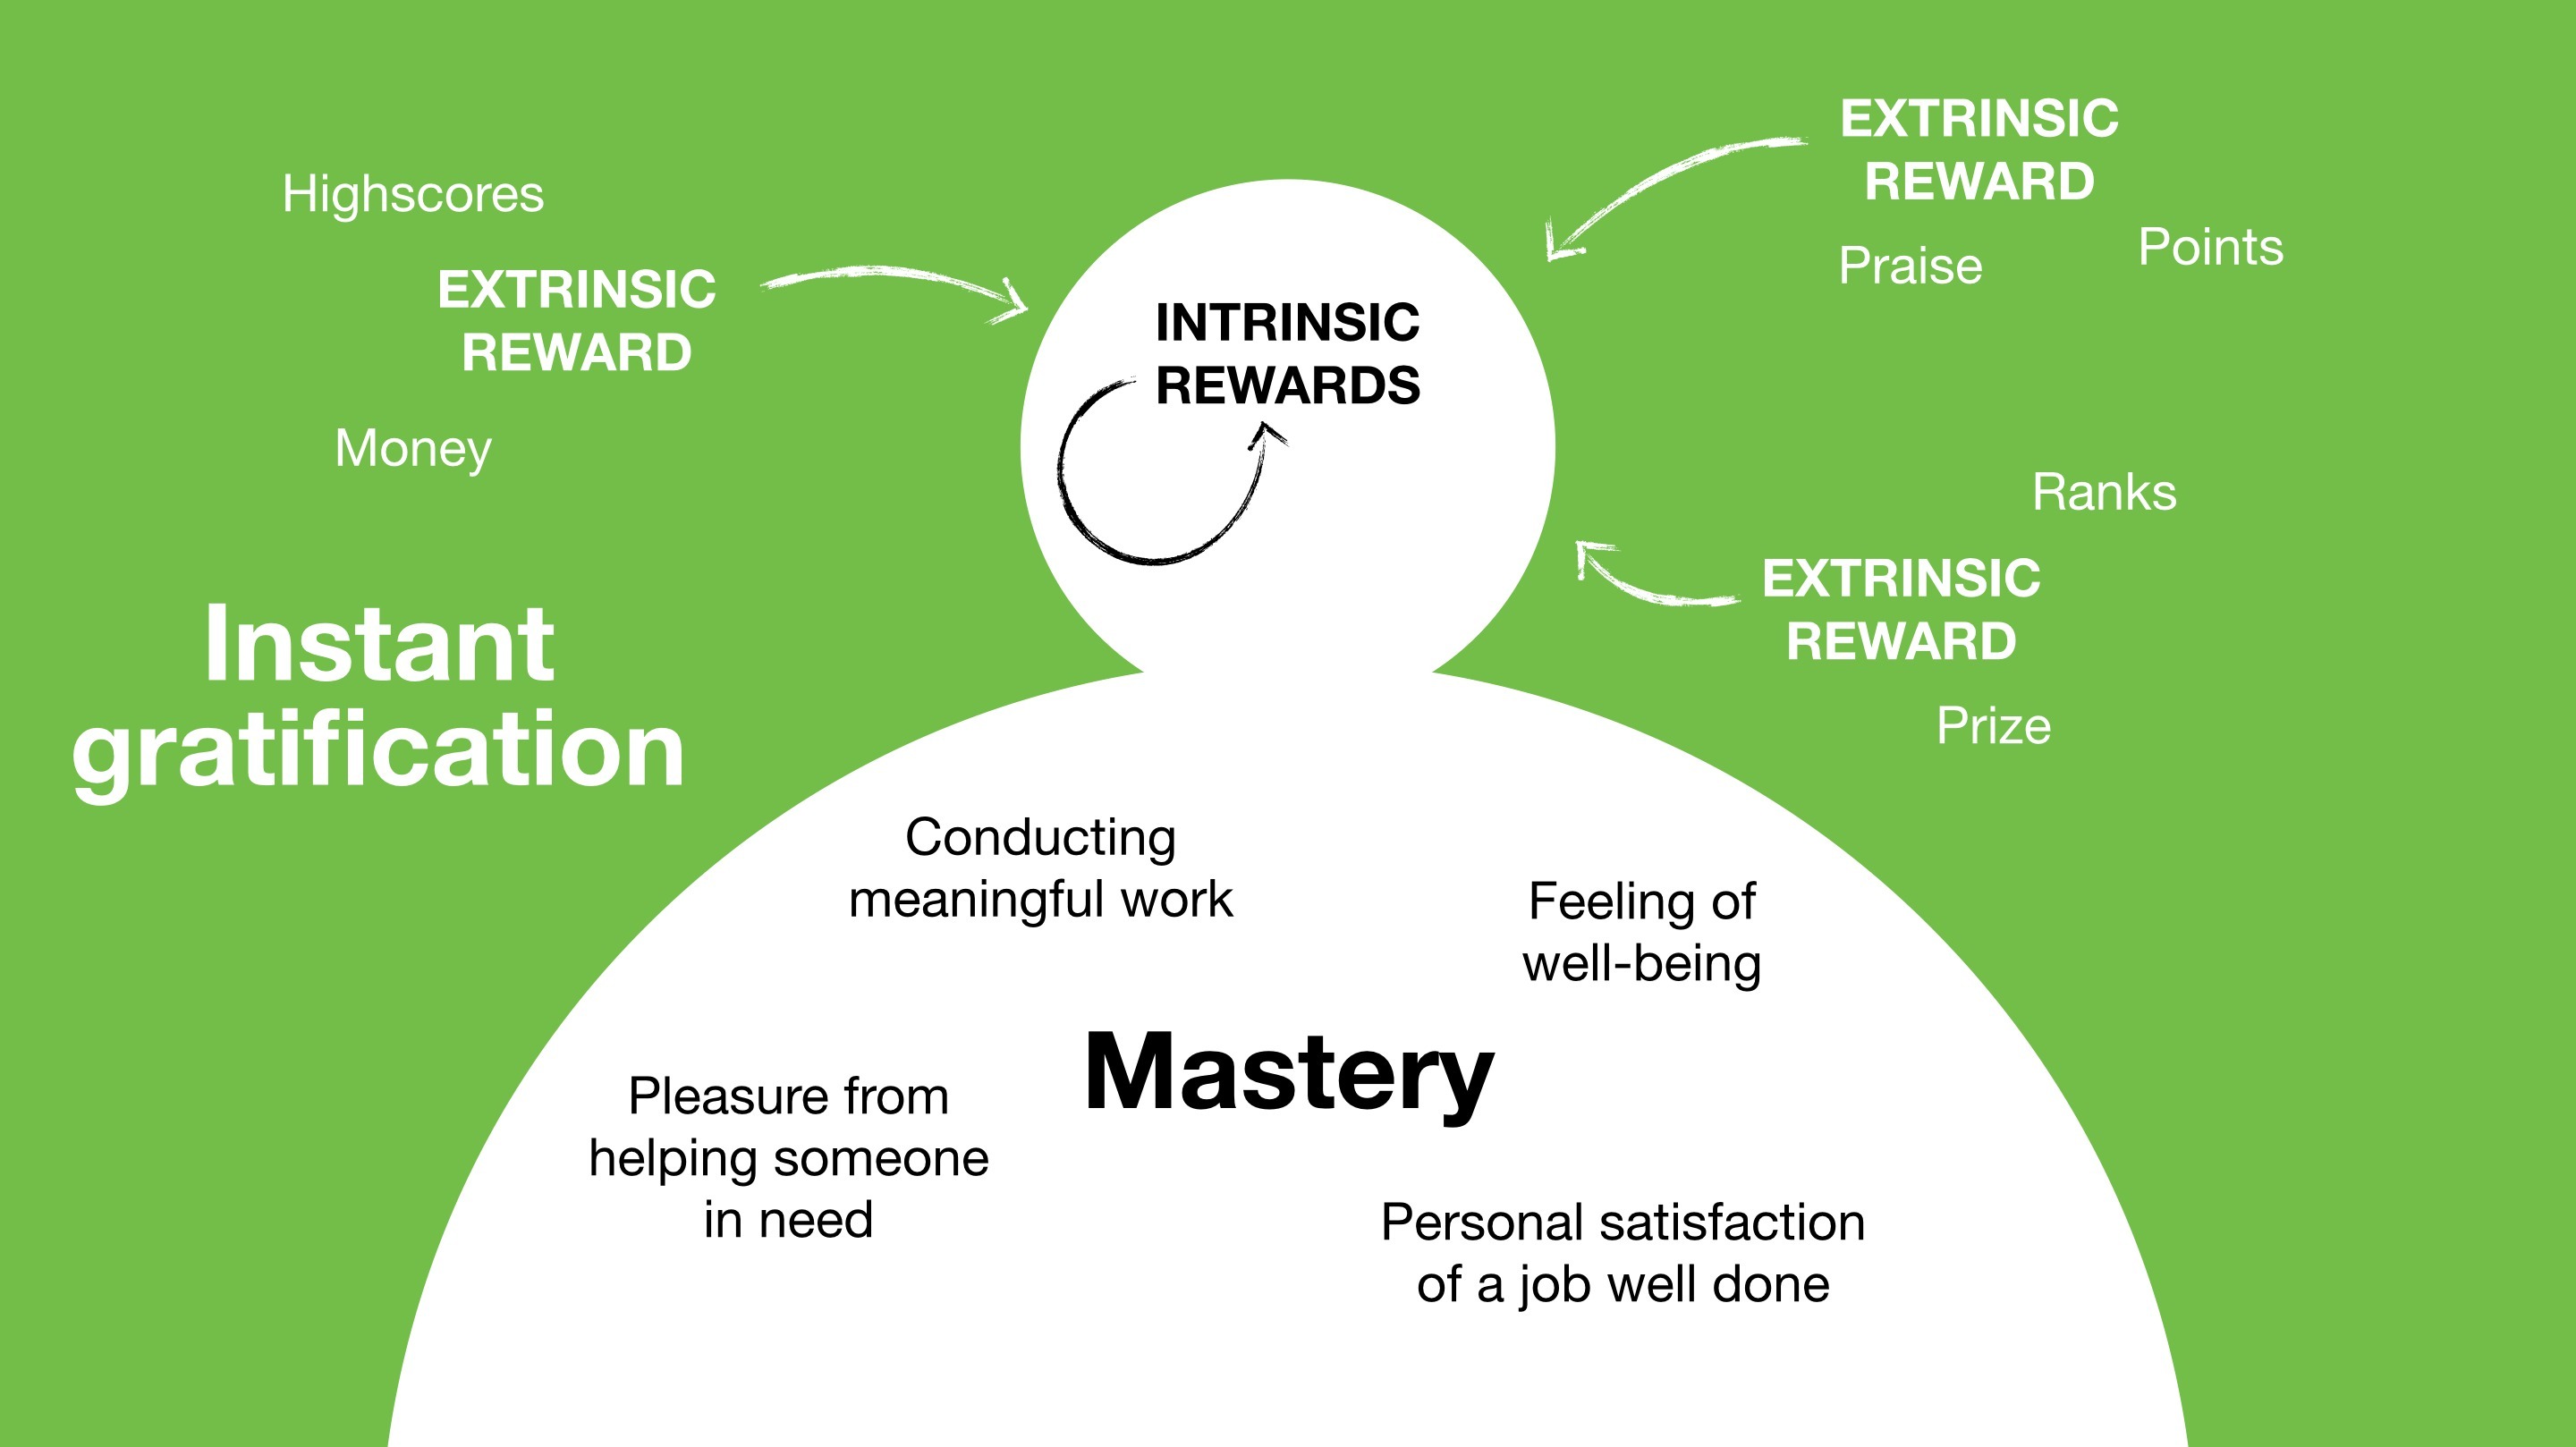 When we talk about rewards being able to motivate behavior, we should rather focus on how rewards can facilitate behavior that will lead to intrinsic rewards such as mastery, recognition, and personal growth.